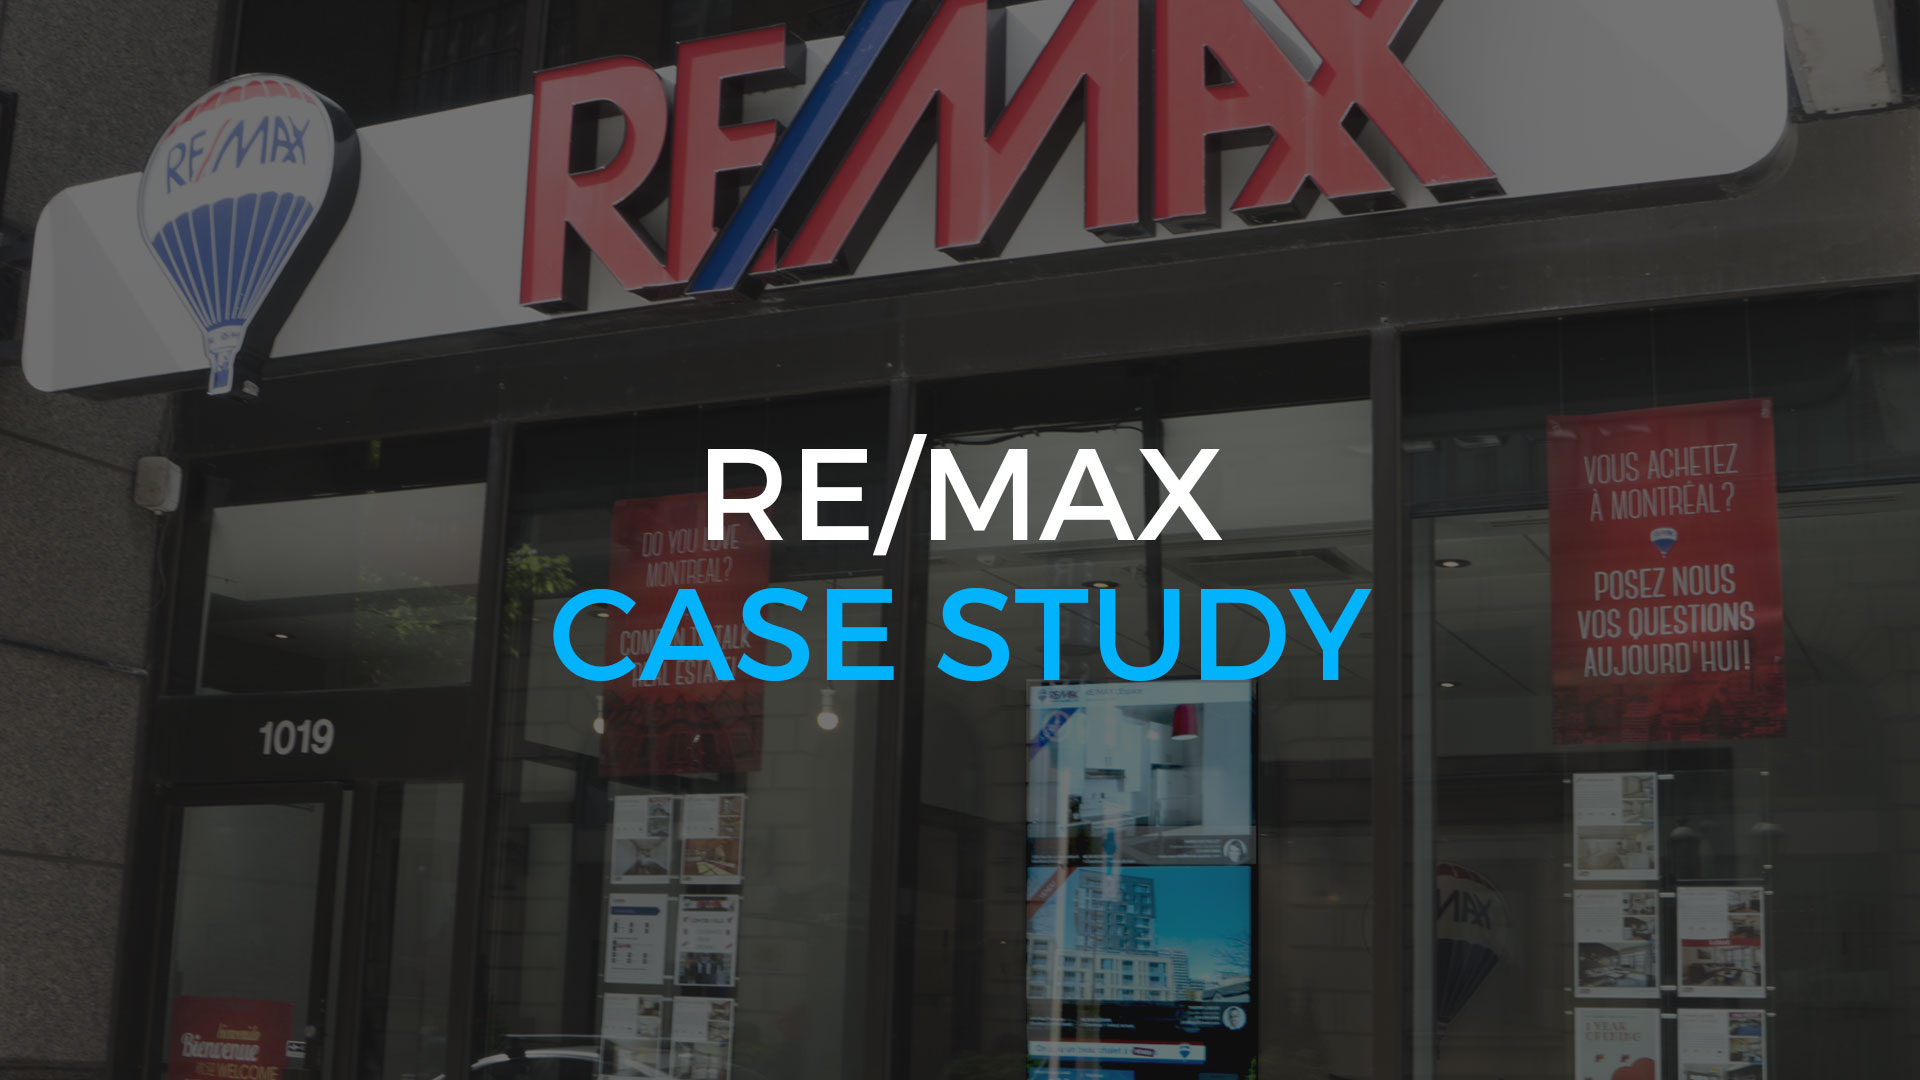 Why is RE/MAX using dynamic digital signage ?